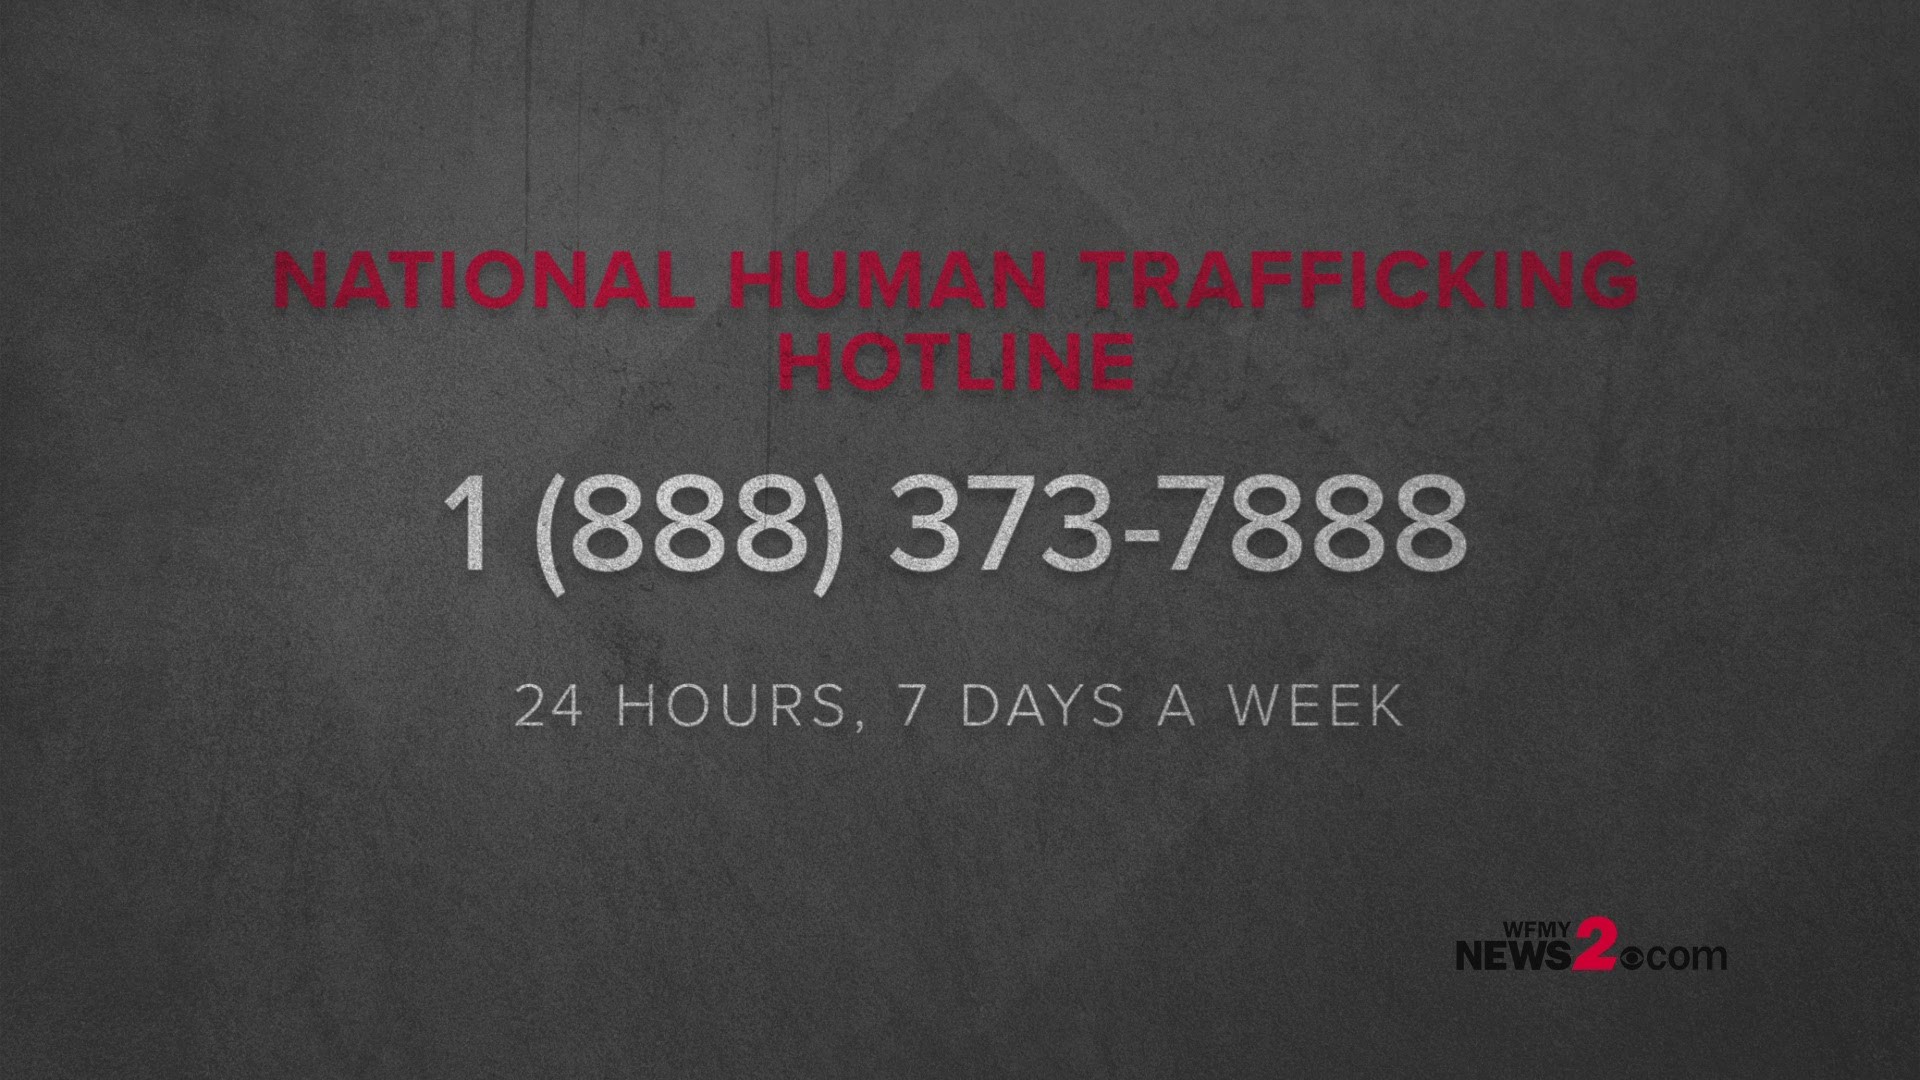 The National Human Trafficking Hotline is a resource used by service providers and law enforcement to receive tips about human trafficking in our country. Anyone can call the NHTH to report a tip or request services at 1-888-373-7888. If you or someone you know if a victim of human trafficking, call now. Calls are 24/7 and always confidential.